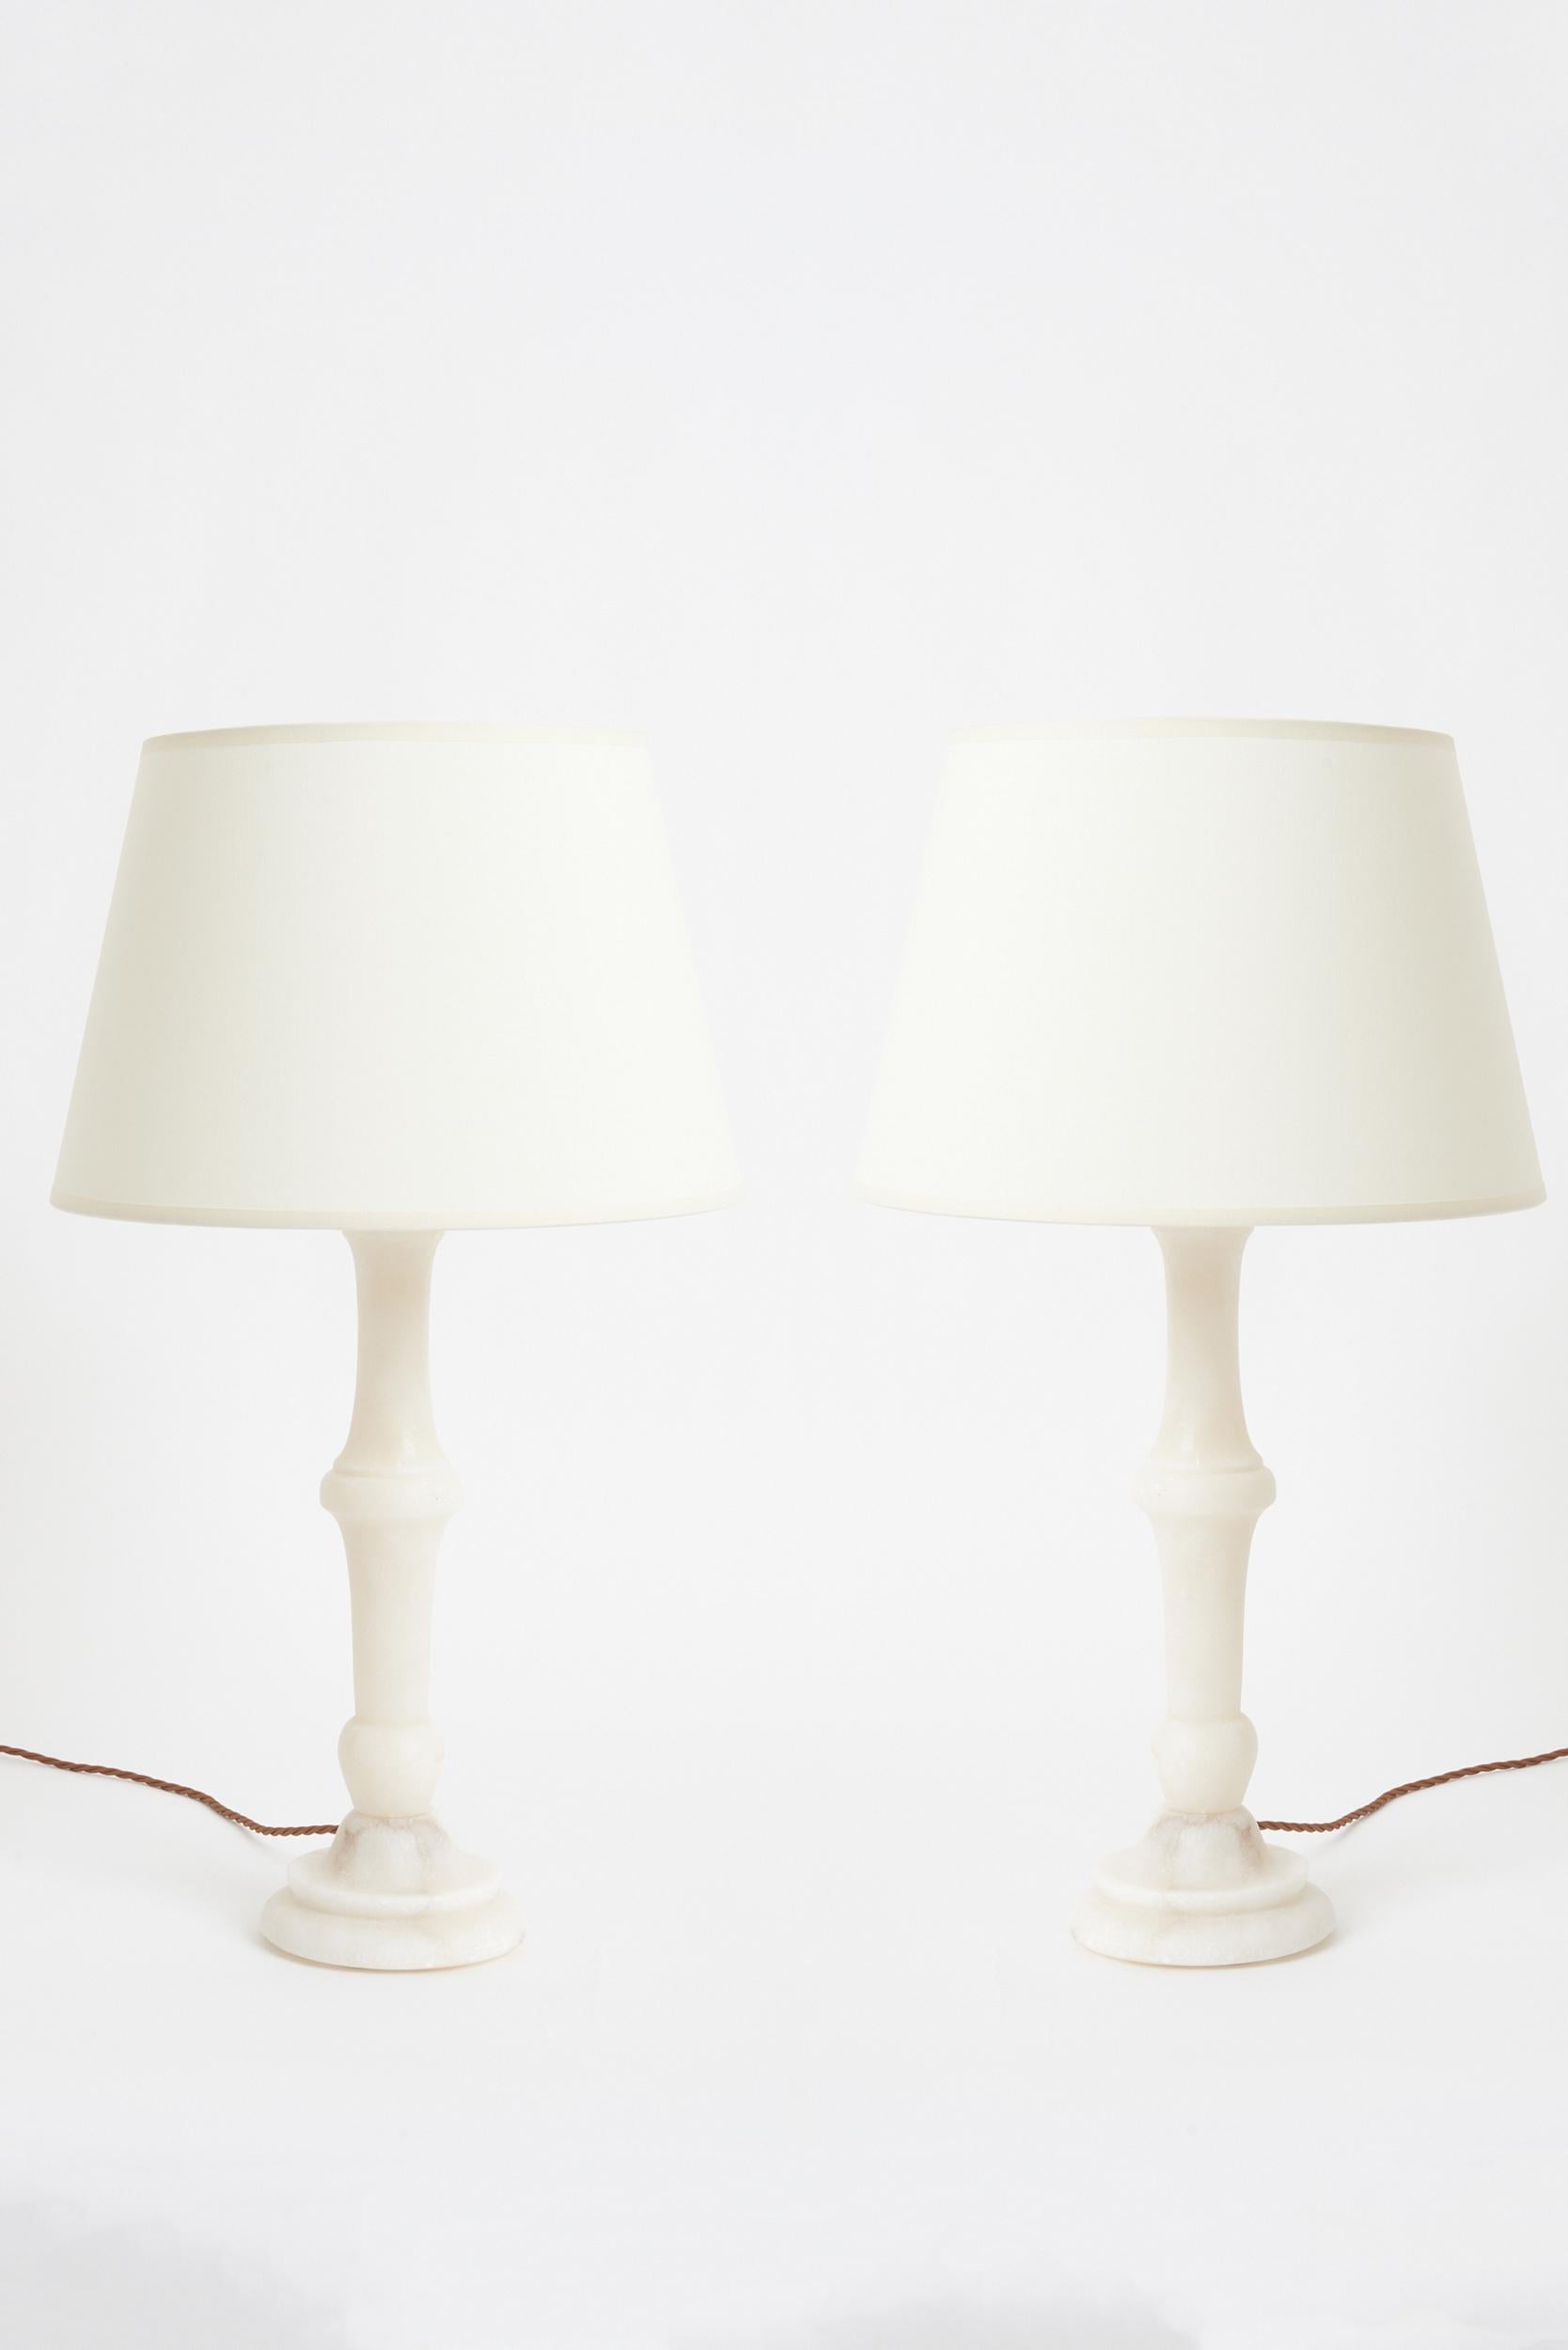 A pair of carved alabaster table lamps
Spain, mid 20th Century
With the shade: 64 cm high by 35.5 cm diameter
Lamp base only: 46 cm high by 15 cm diameter.